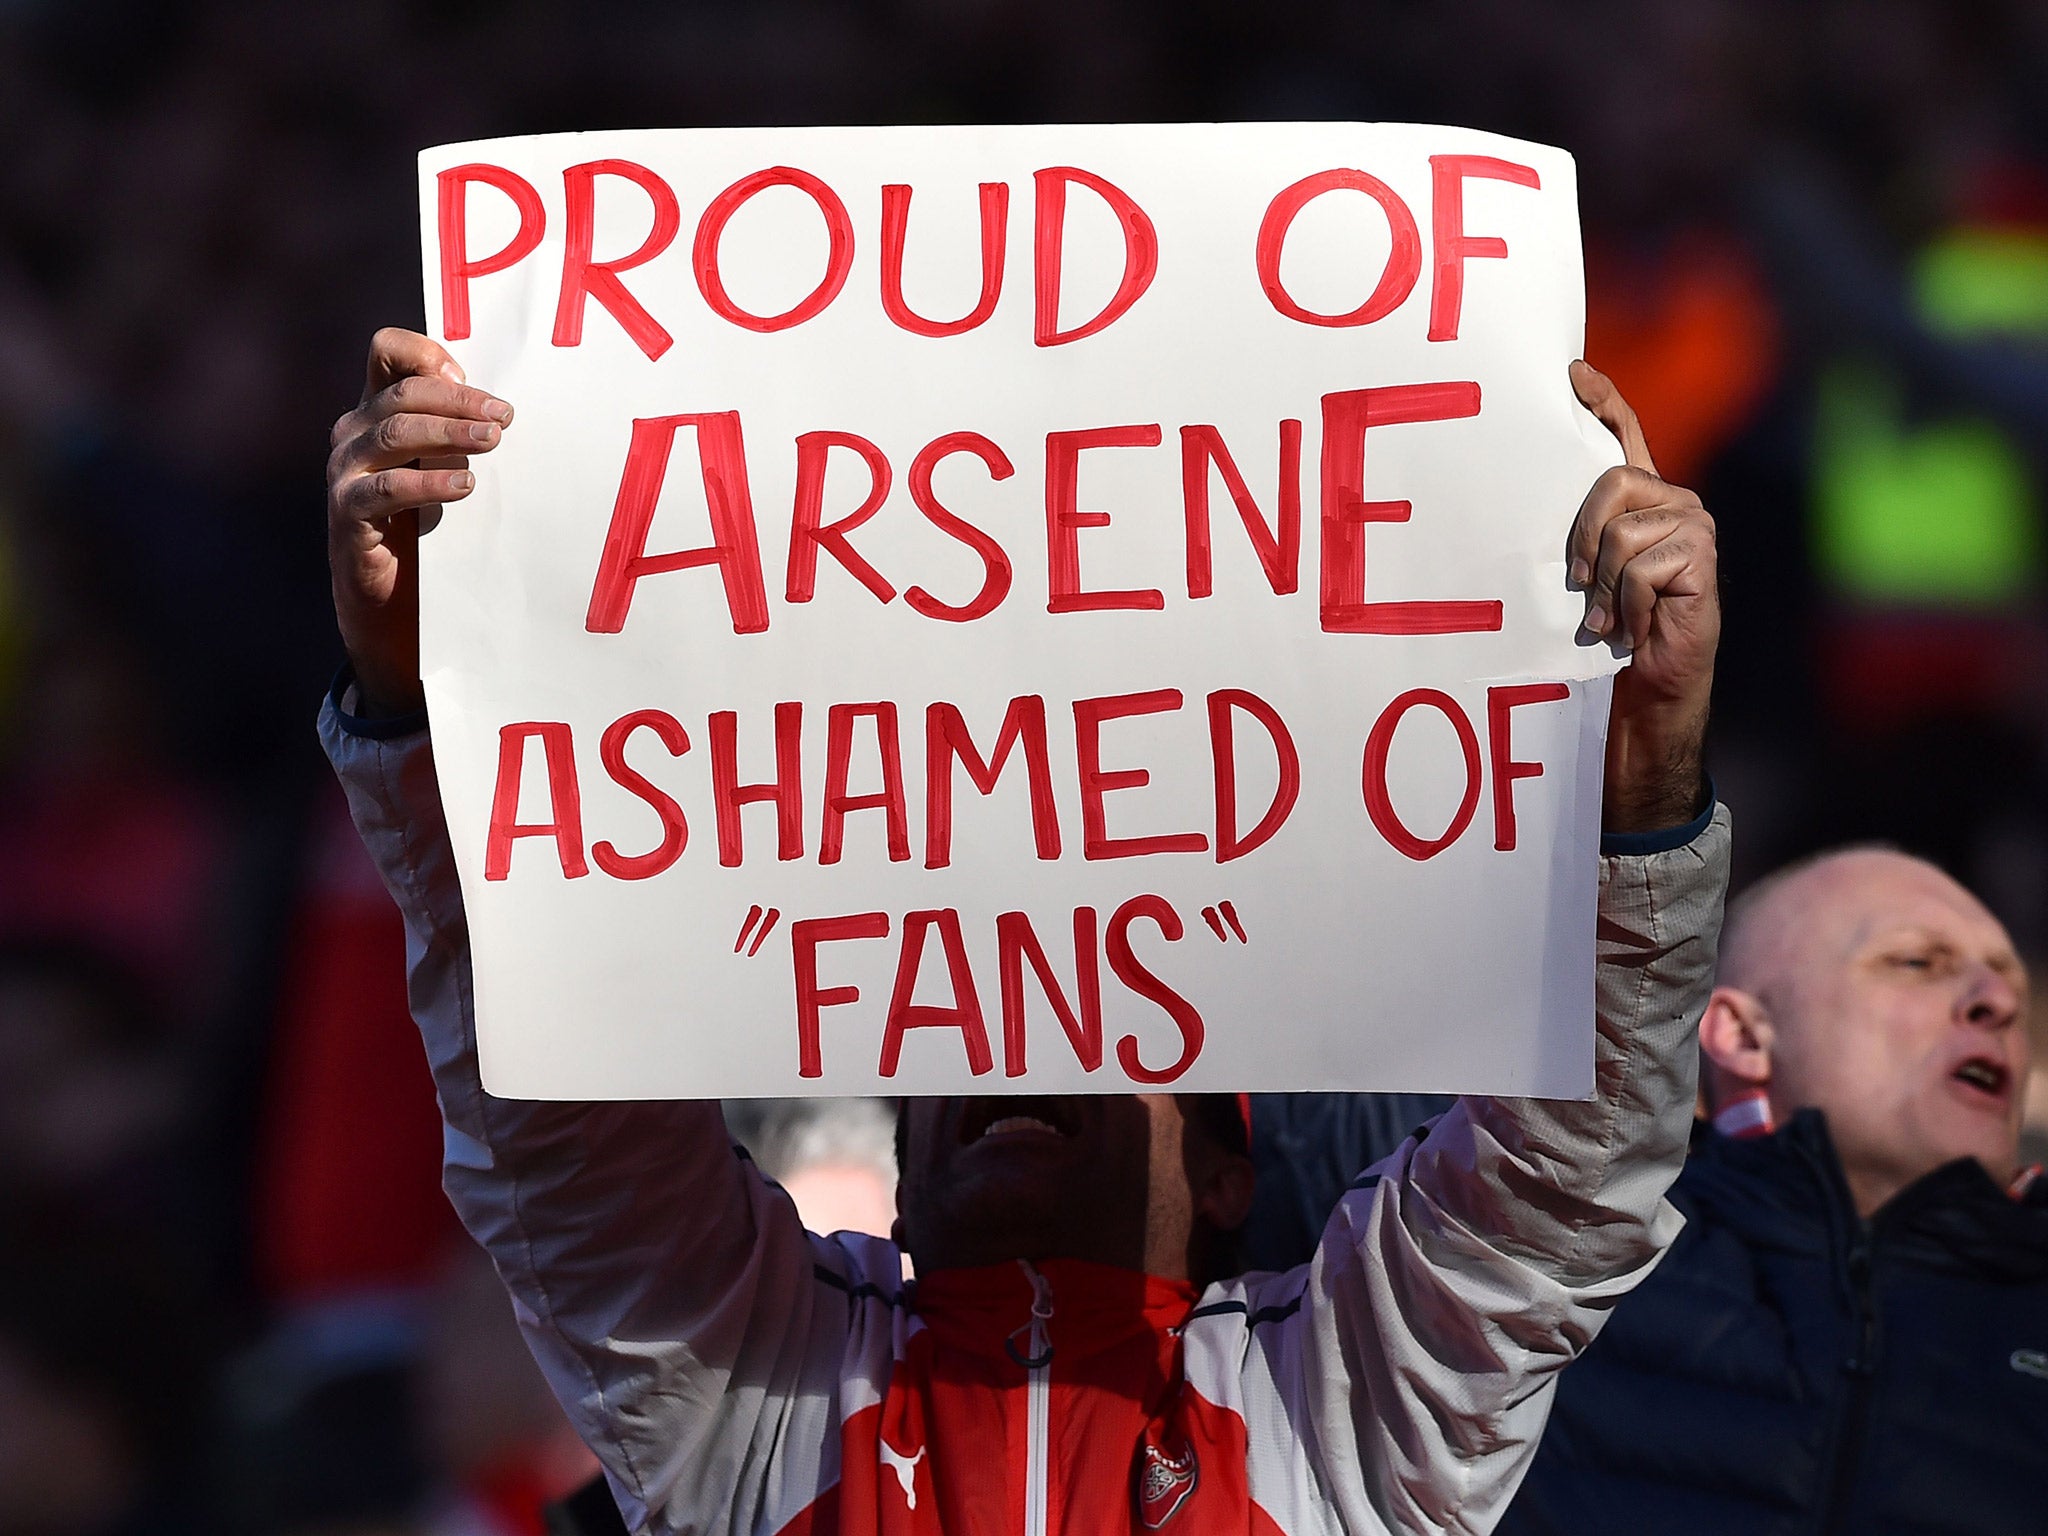 An Arsenal fan shows his support for Arsene Wenger